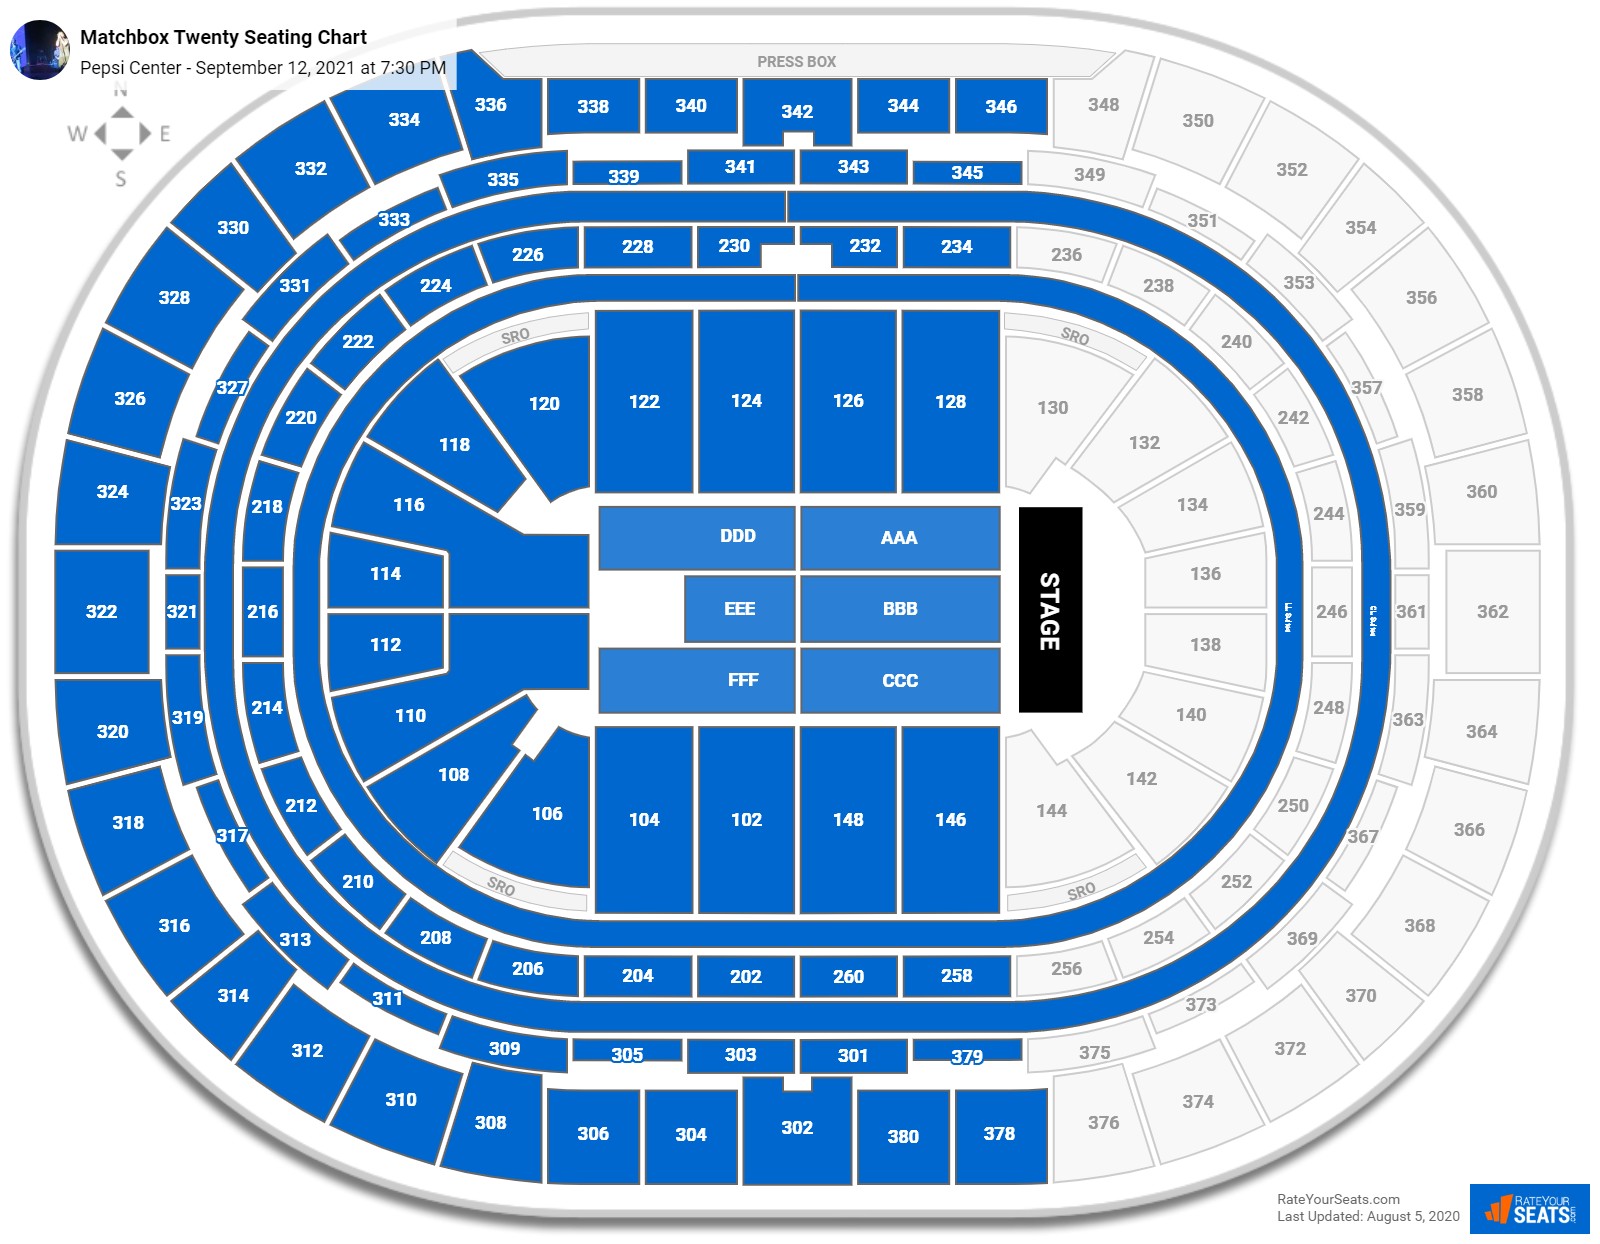 Pepsi Center Seating Charts for Concerts